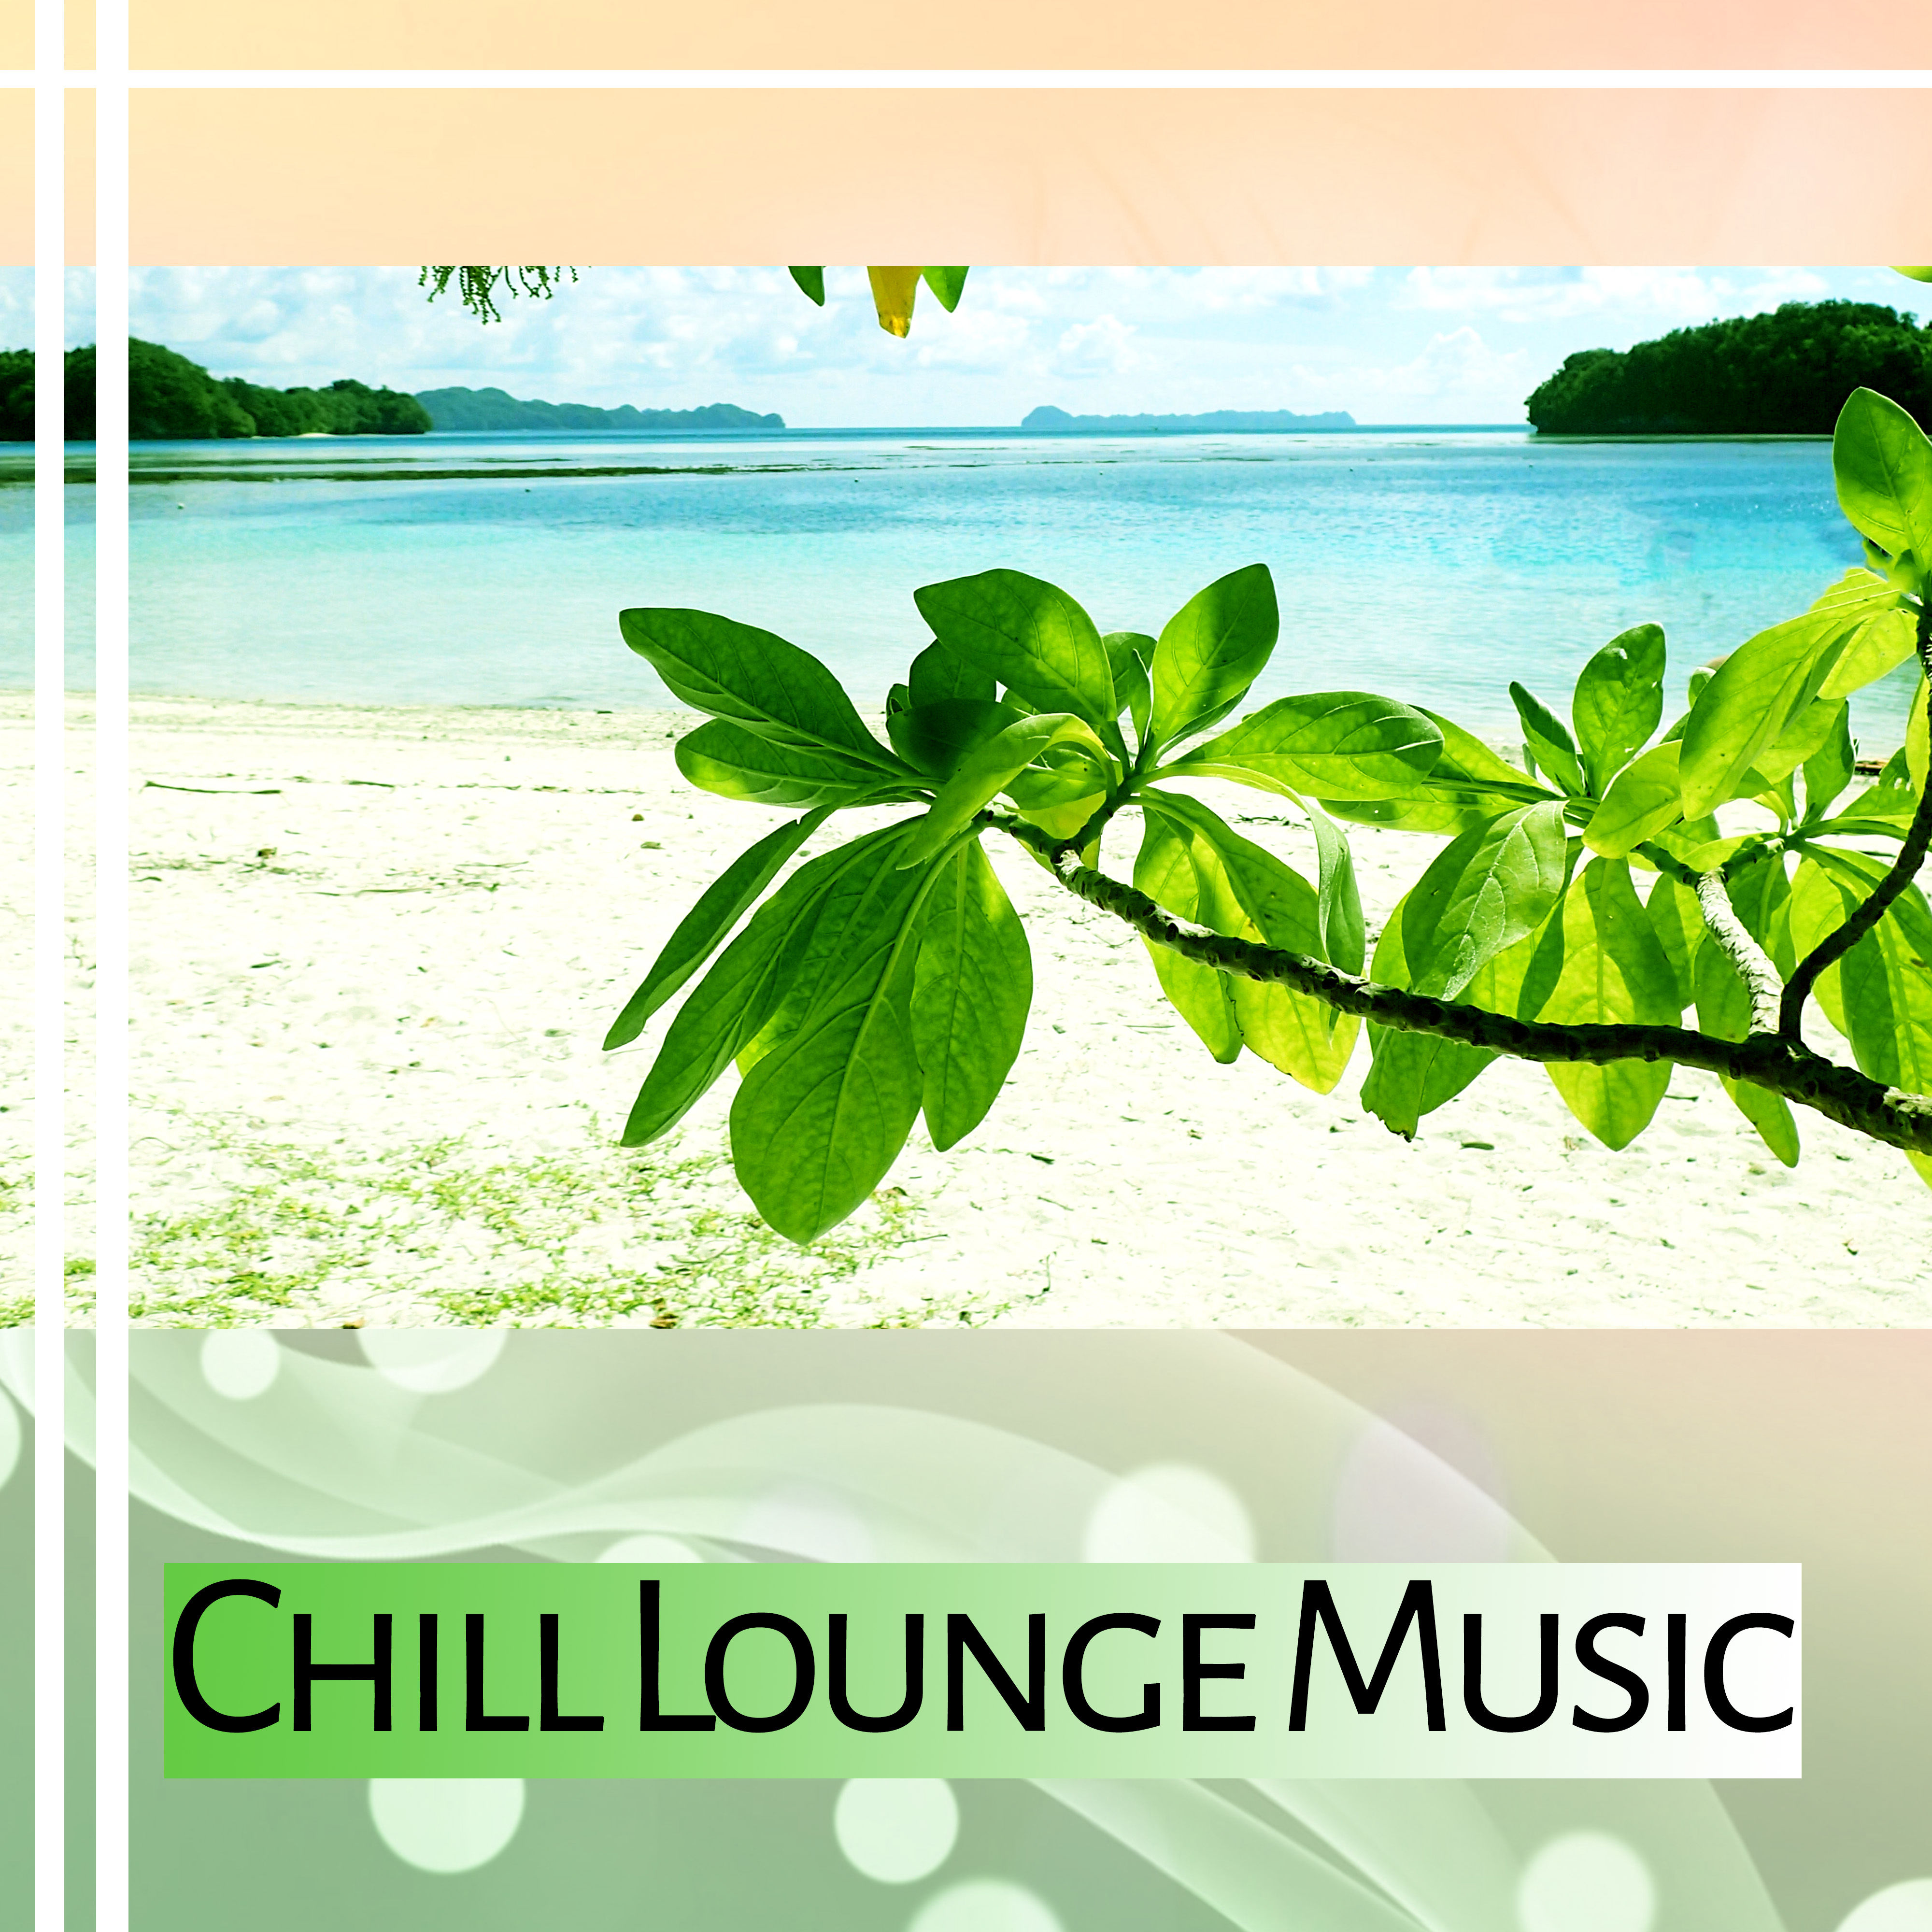 Chill Lounge Music – Soft Music to Calm Down, Beach Lounge, Relaxing Sounds, Mind Peace